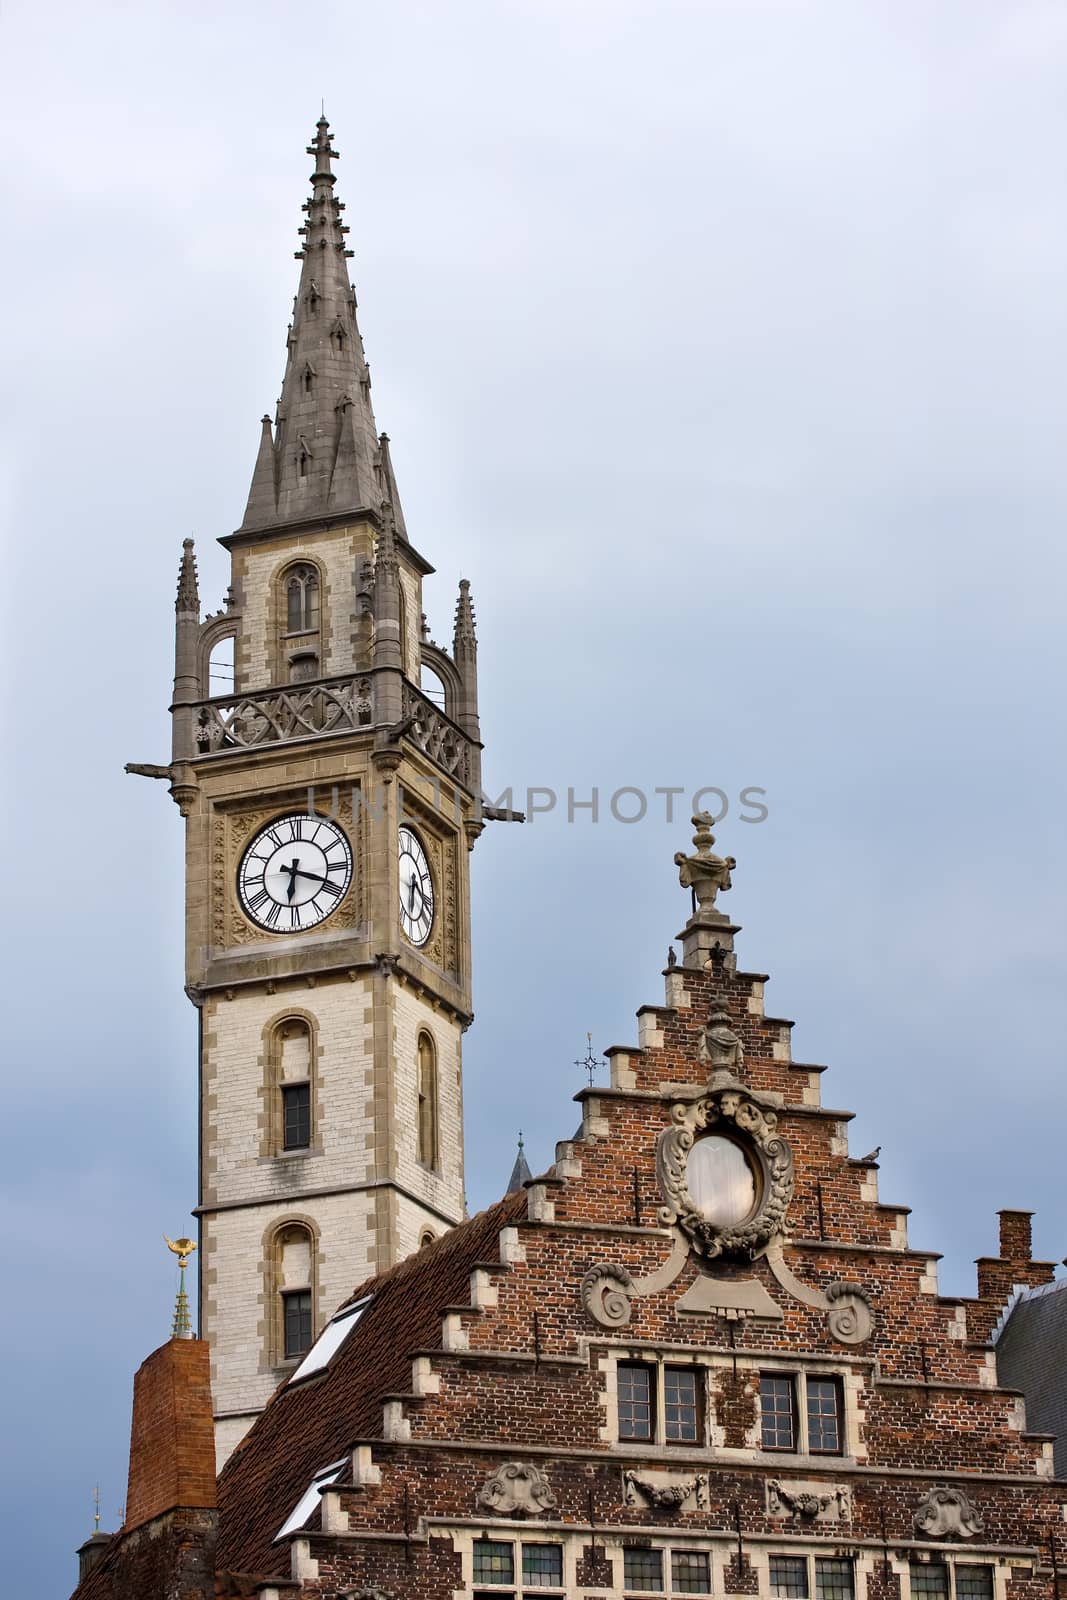 Clock tower in Gent, Belgium by aniad